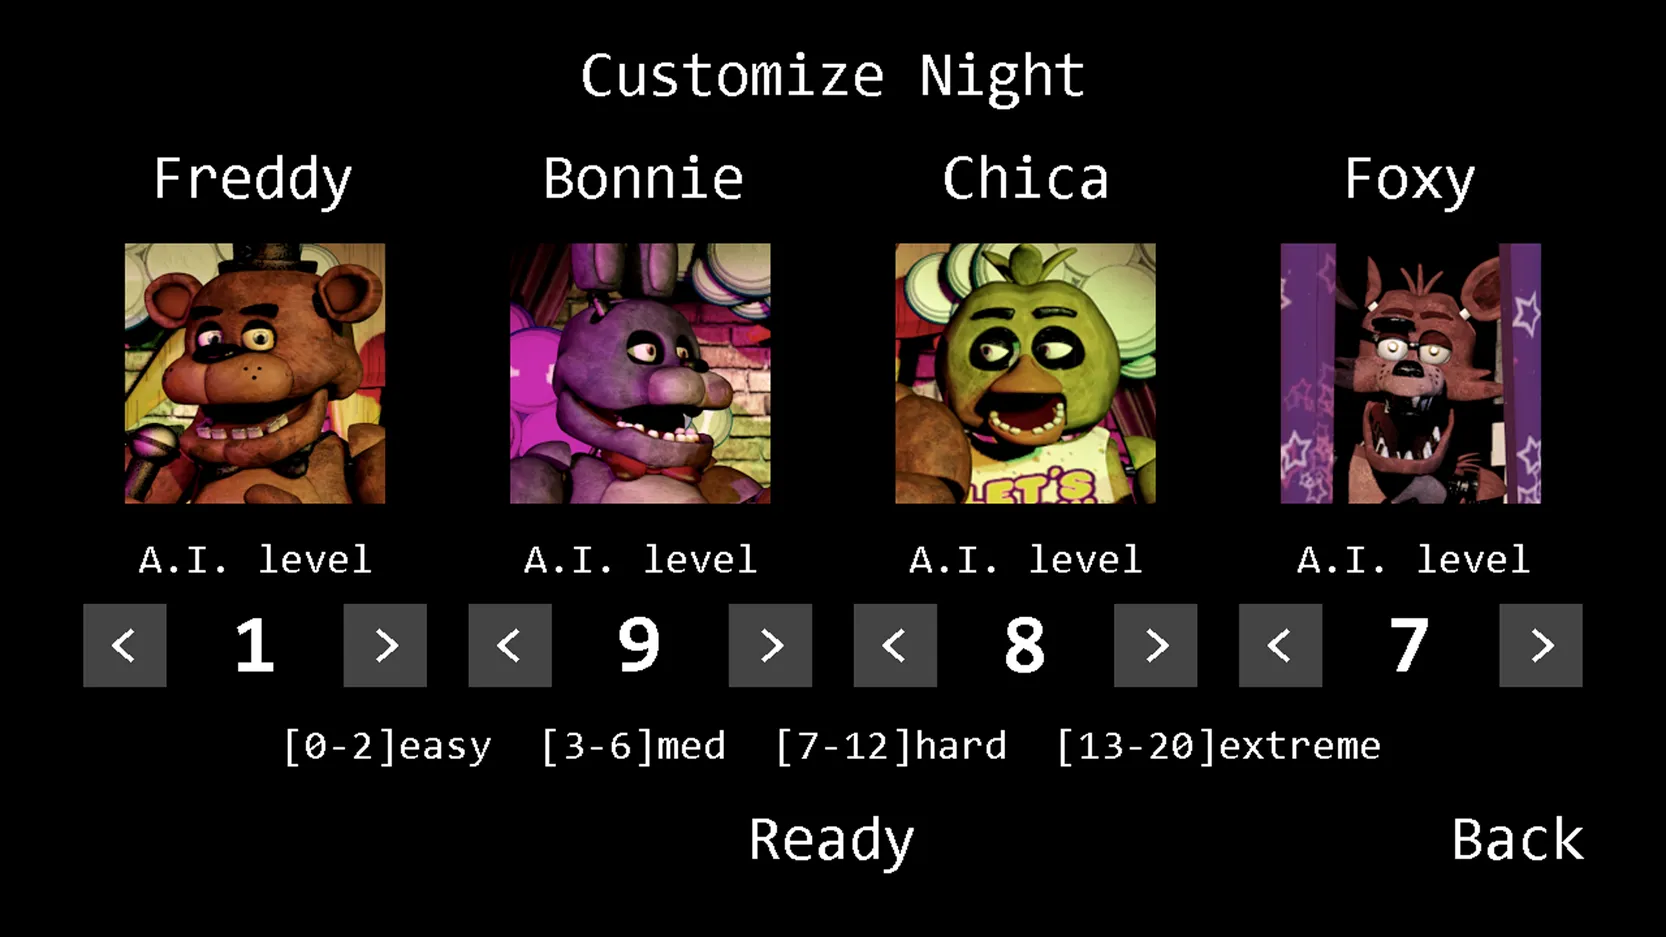 Download Five Nights at Freddy's 2 (MOD, Unlocked) 2.0.4 APK for android